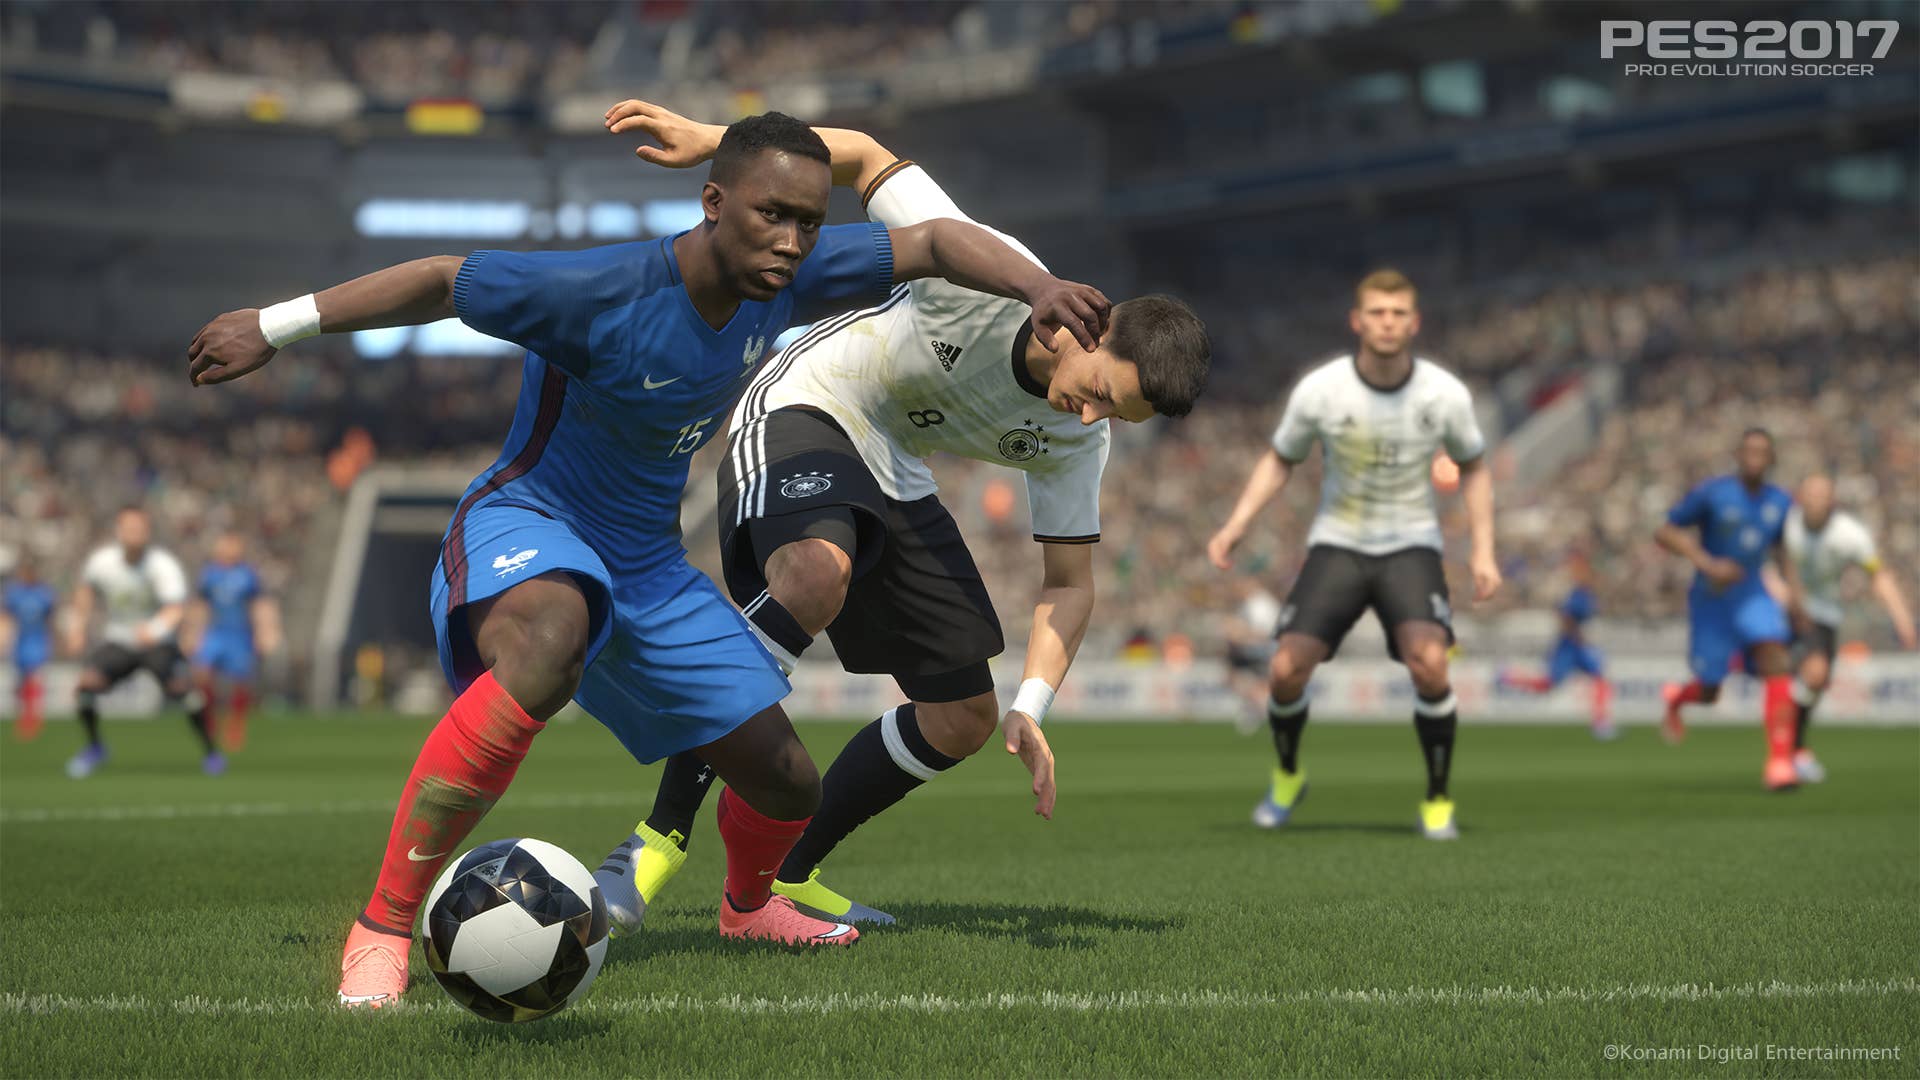 PES 2017: 7 things that make this the best PES game yet